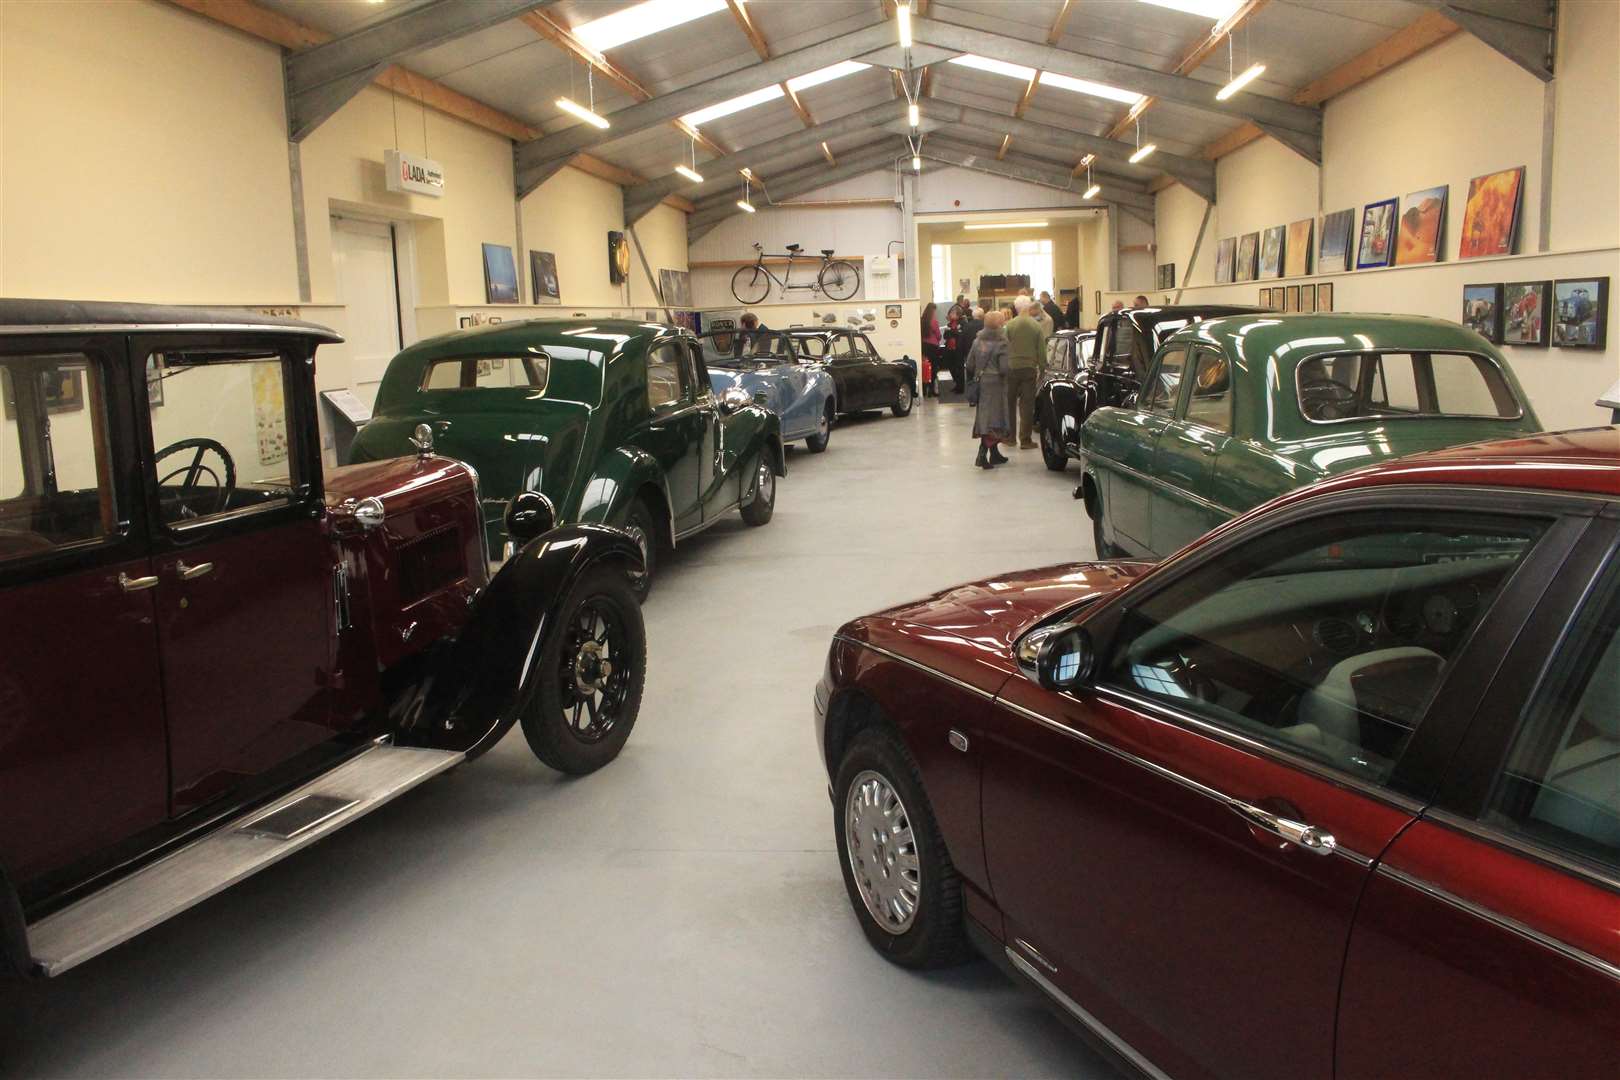 Some of the cars in the Edward Sutherland Gallery.